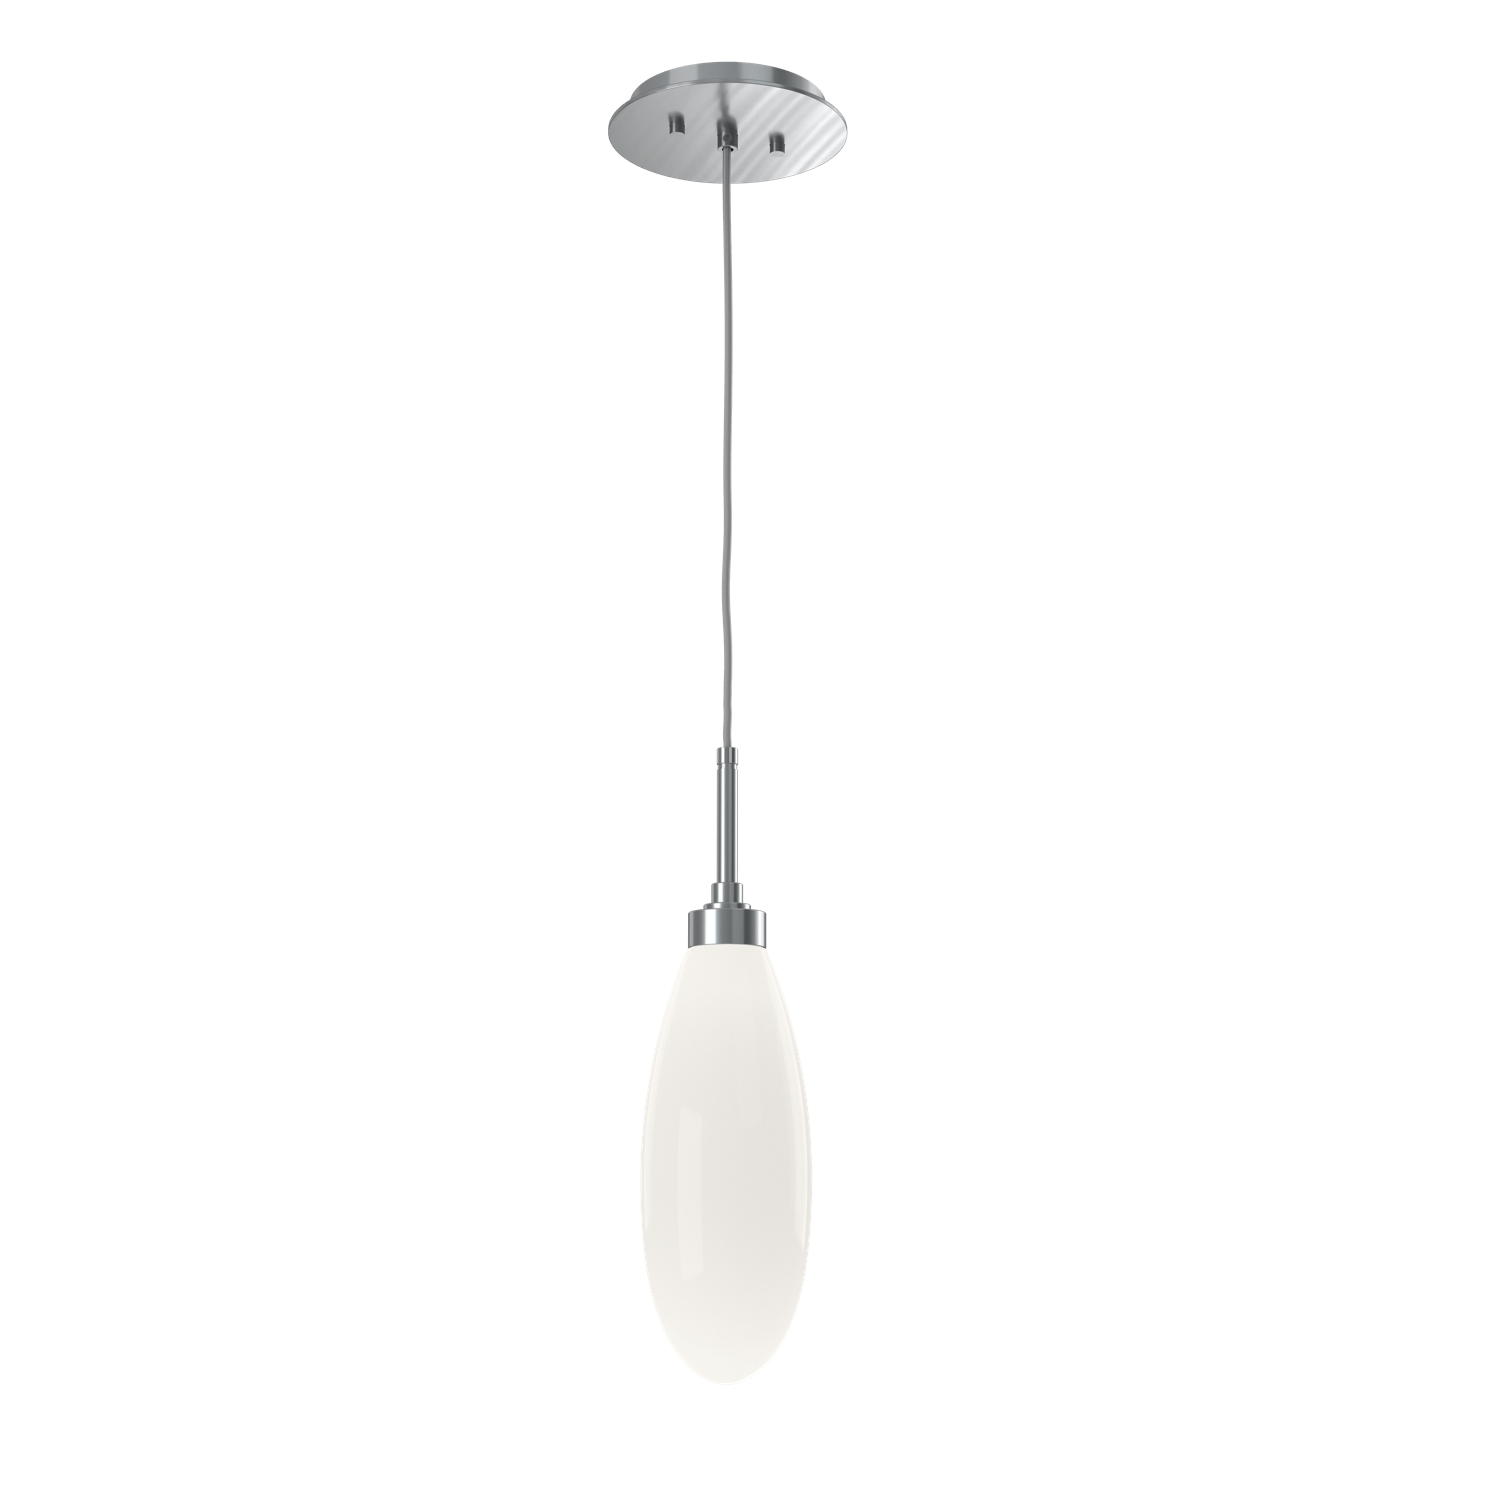 LAB0071-15-SN-WL-LL-Hammerton-Studio-Fiori-pendant-light-with-satin-nickel-finish-and-opal-white-glass-shades-and-LED-lamping